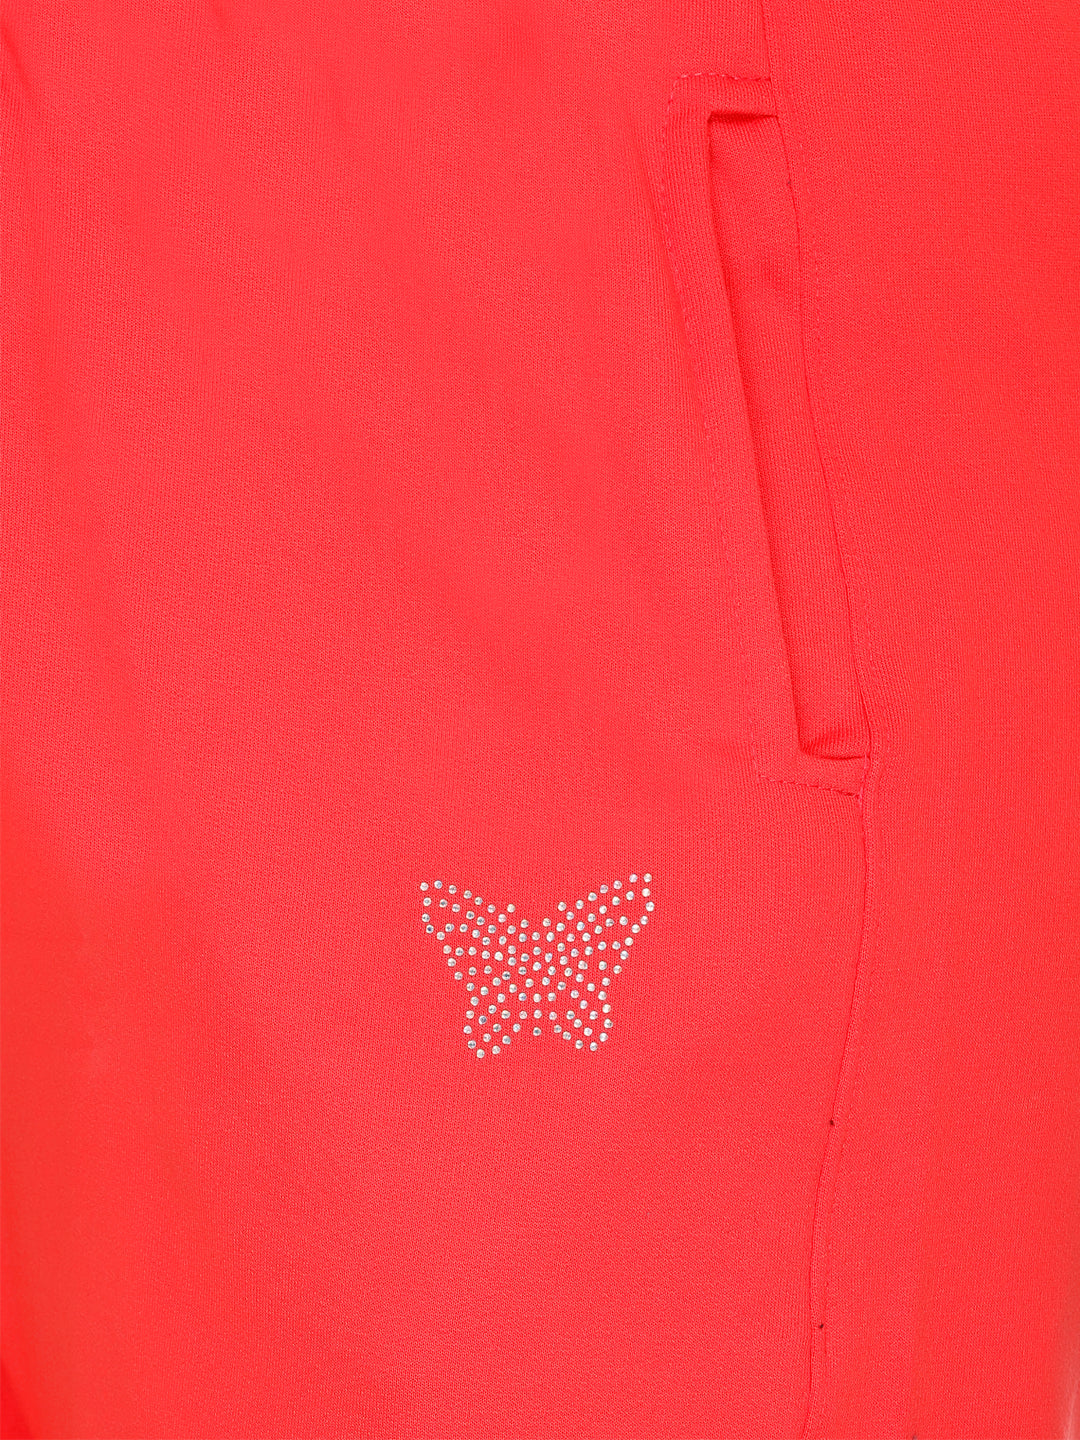 Stylish Coral Red Winter Wear Fleece Track Pants For Women (M To 5XL) Online In India